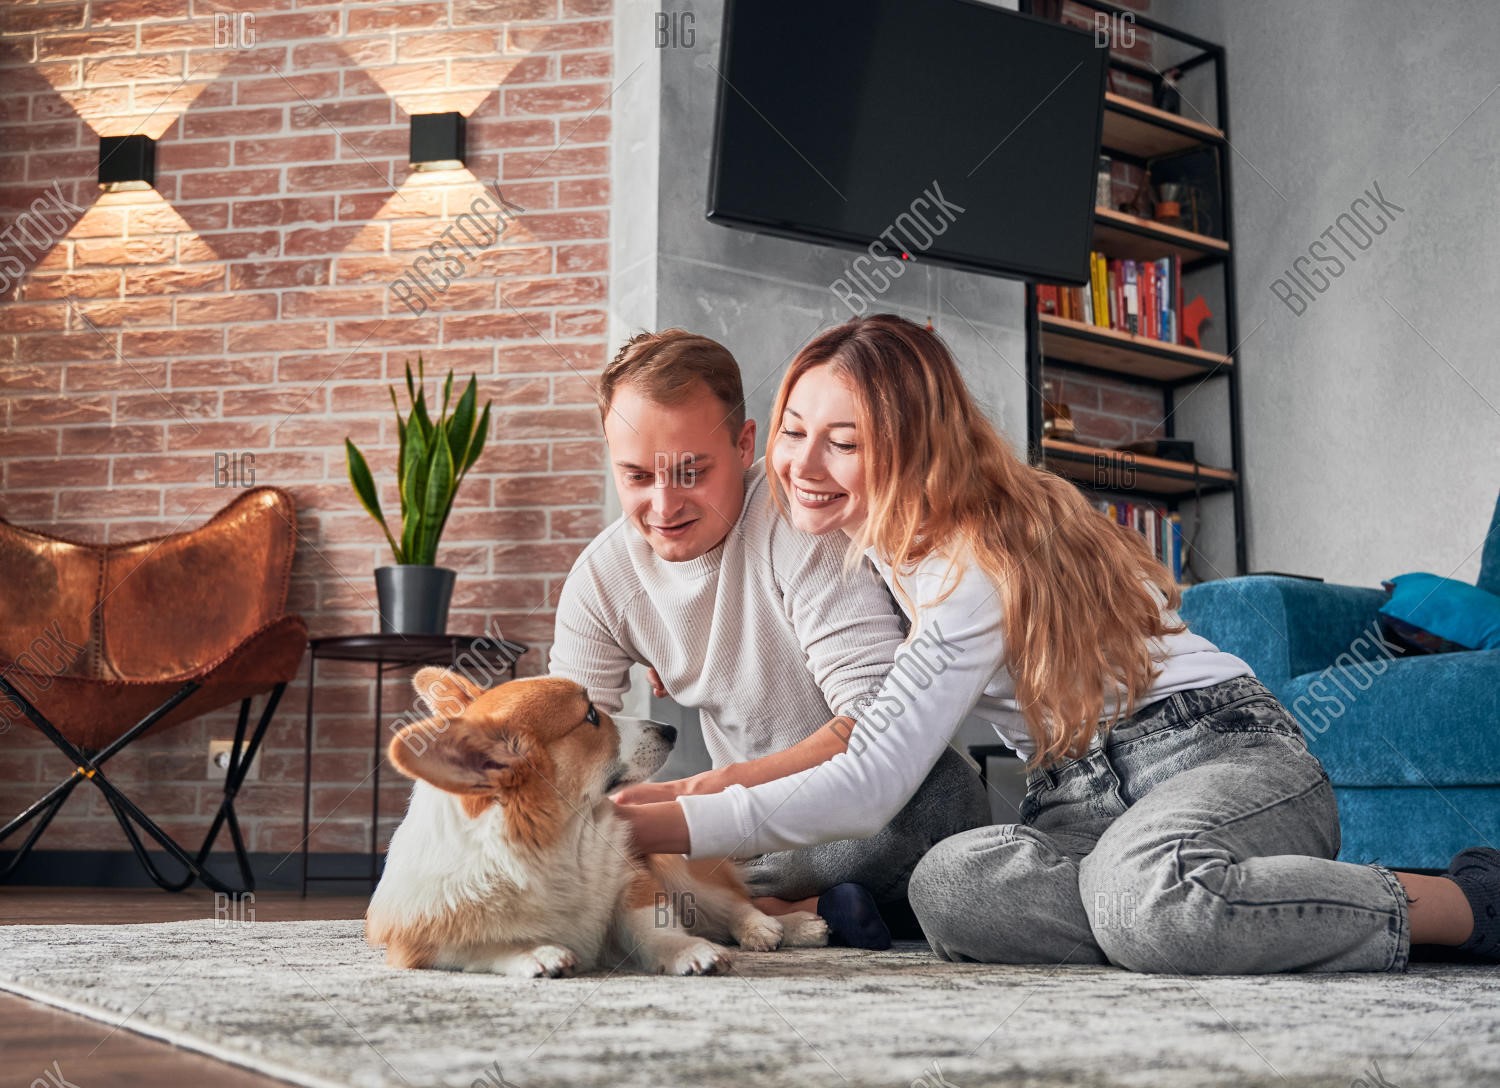 Keeping Pets Comfortable Staying in Corporate Apartments